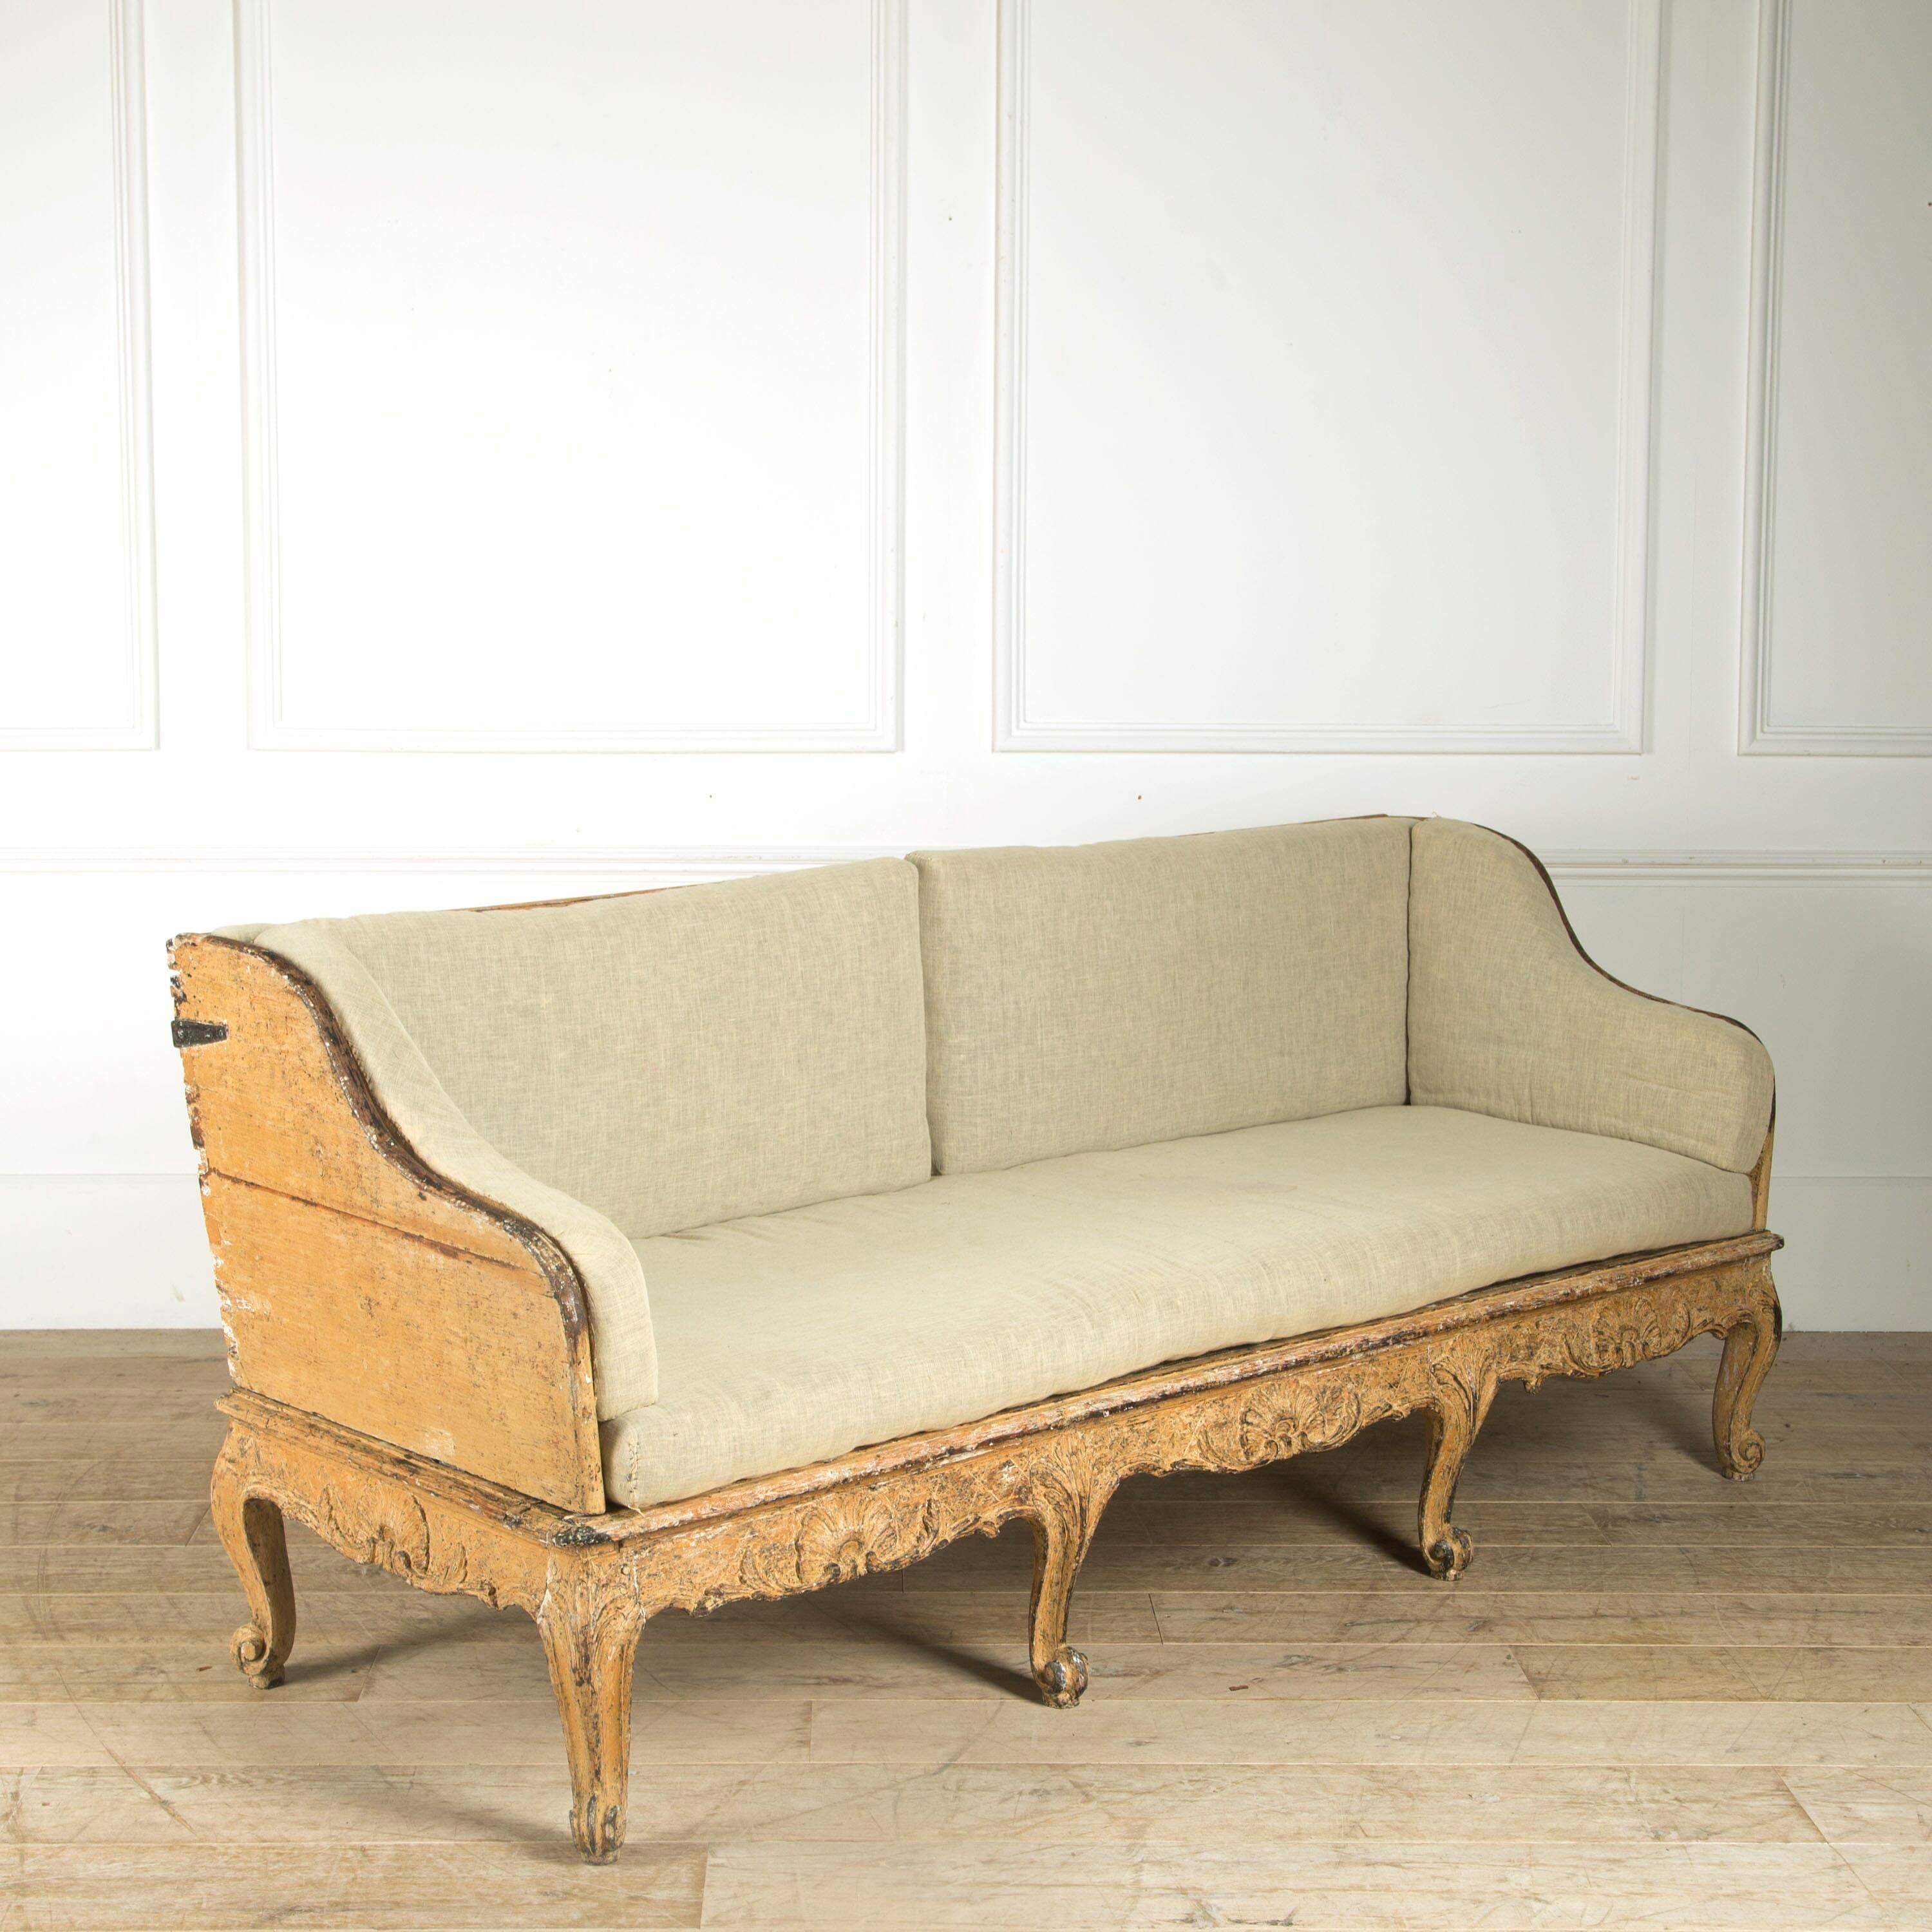 Swedish sofa manufactured in Stockholm, circa 1770.

Beautiful serpentine arms, carved ornamentation along the bottom and scroll outside legs.

The original horsehair seat pads have not been recovered. Original refreshed paint finish.